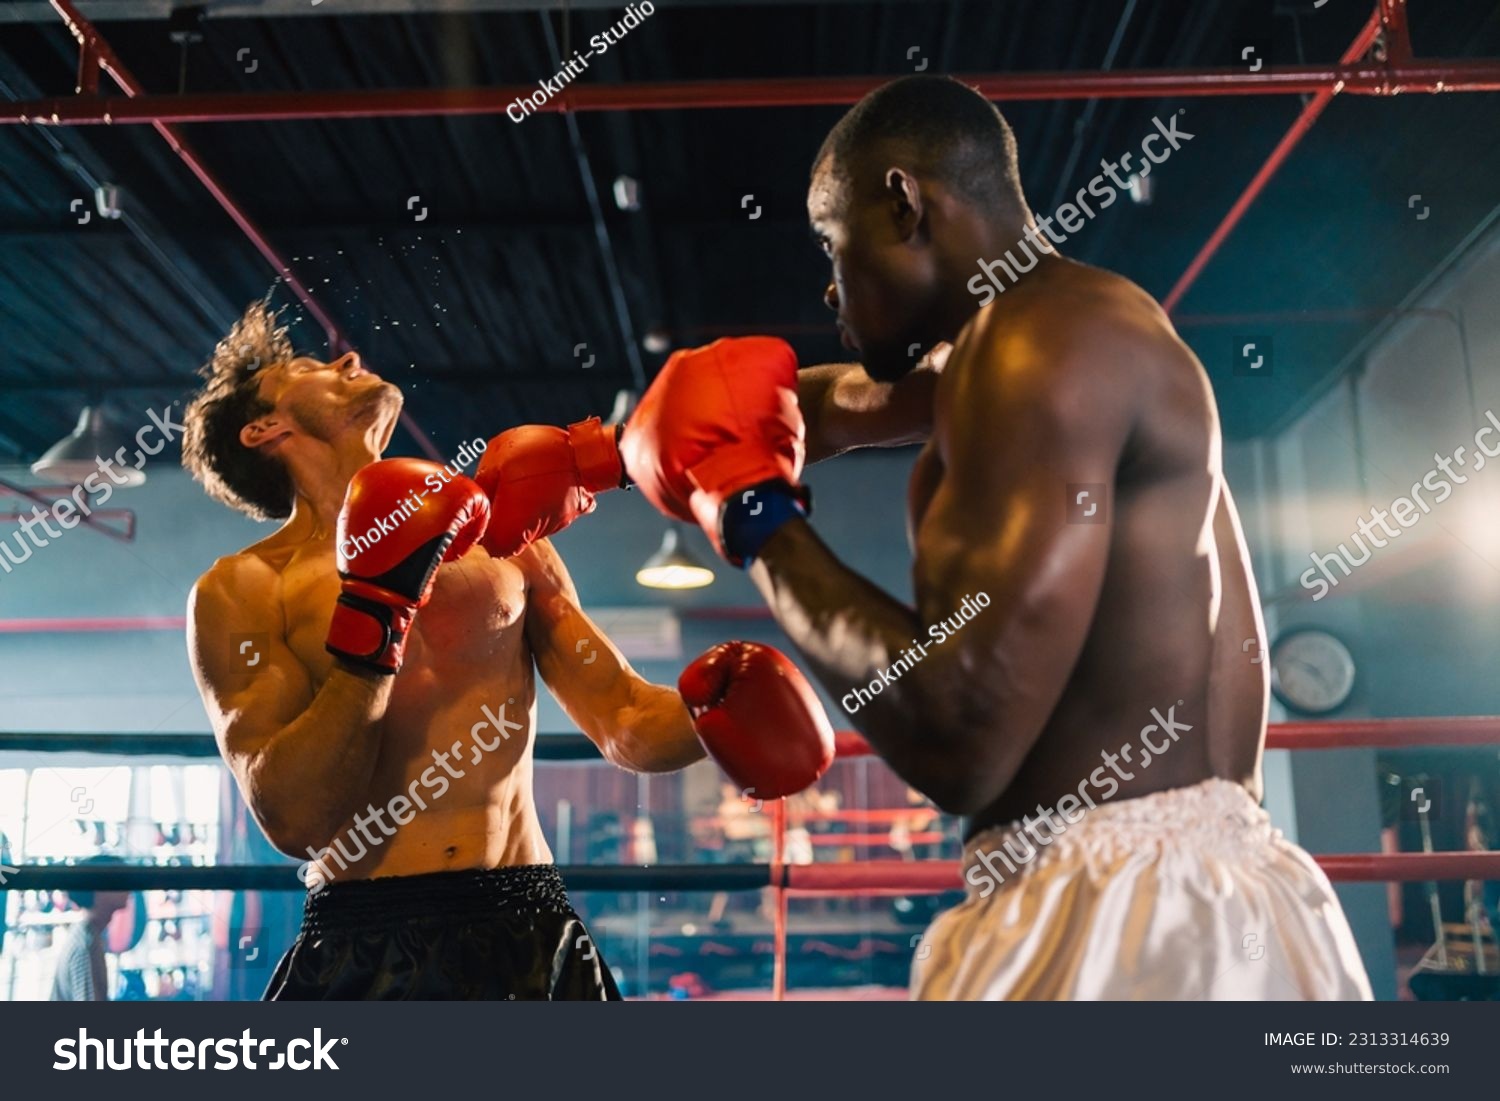 Two professional boxer man exercising in Thai boxing match or MMA in red gloves at the moment of impact on punching, background of ring during boxing fight, sport training for strength power body hit #2313314639